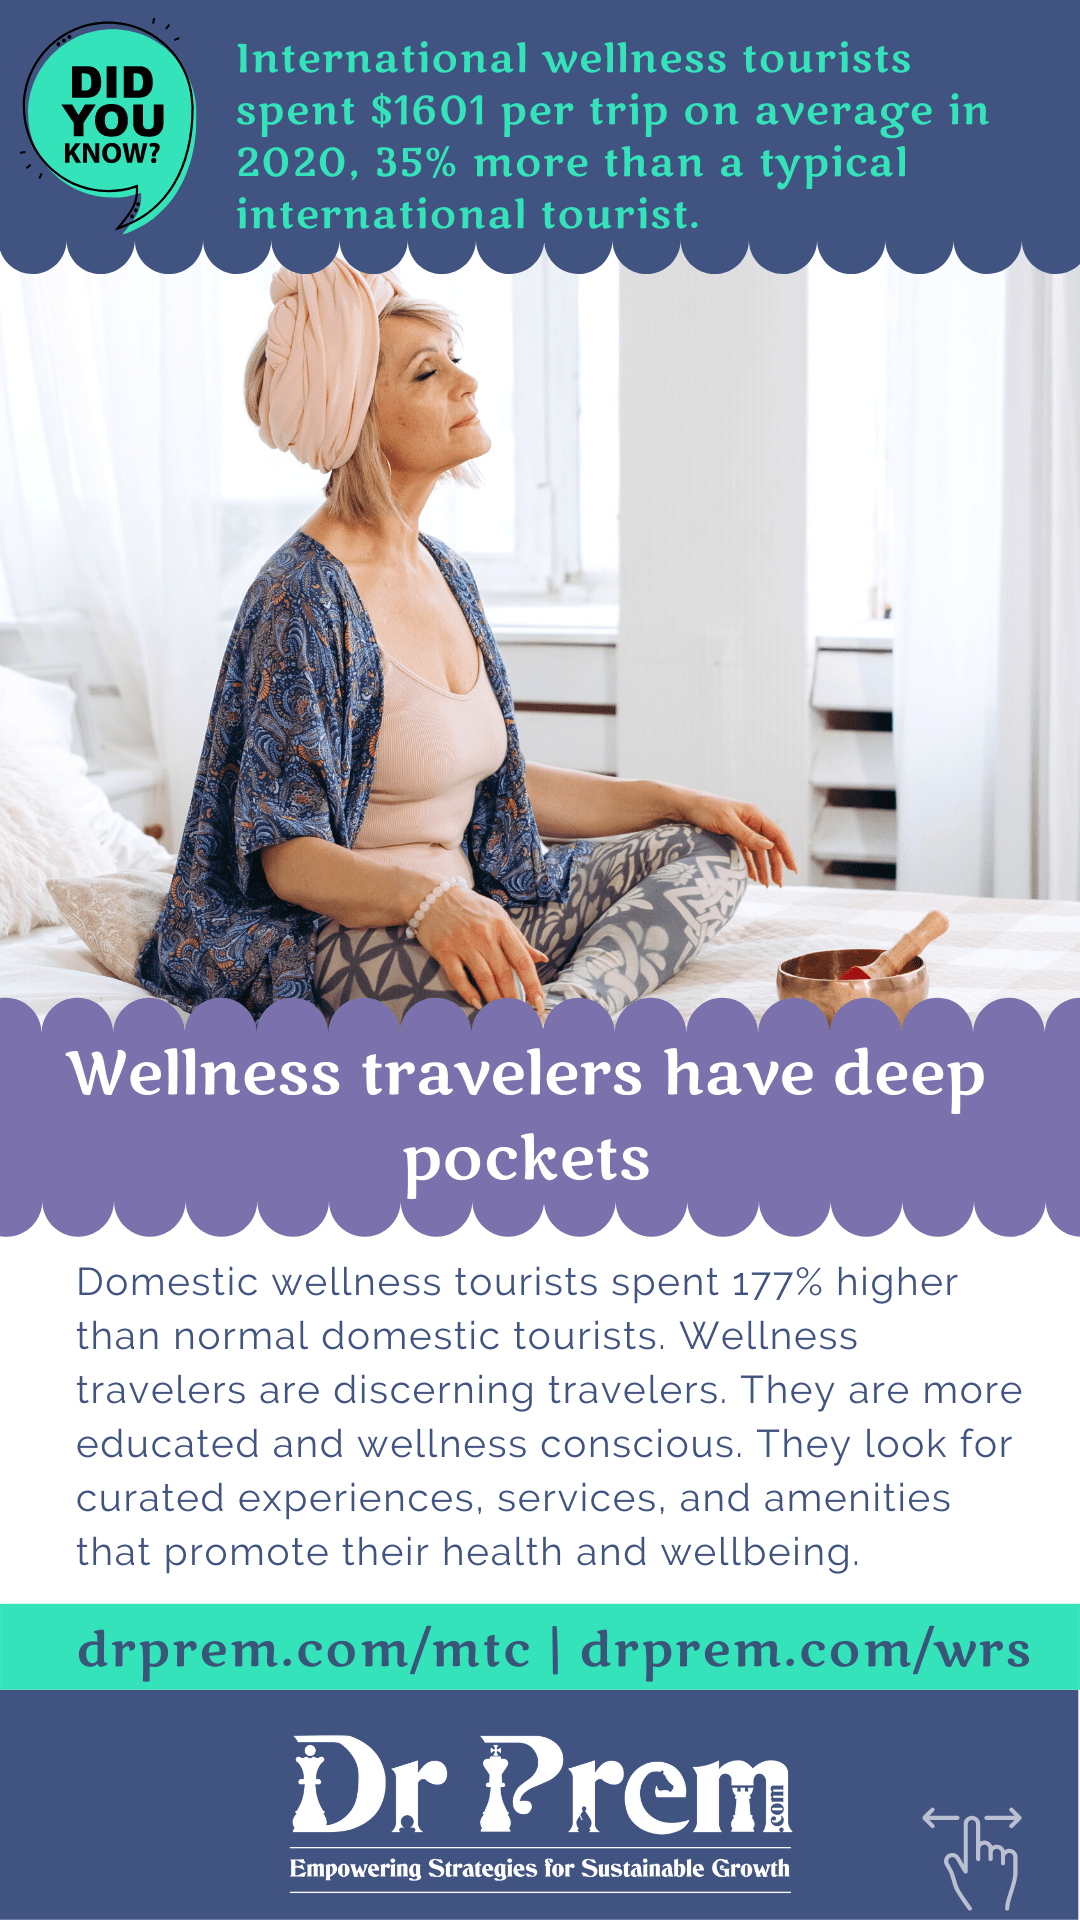 Why should you start your medical tourism and wellness tourism business now - 11